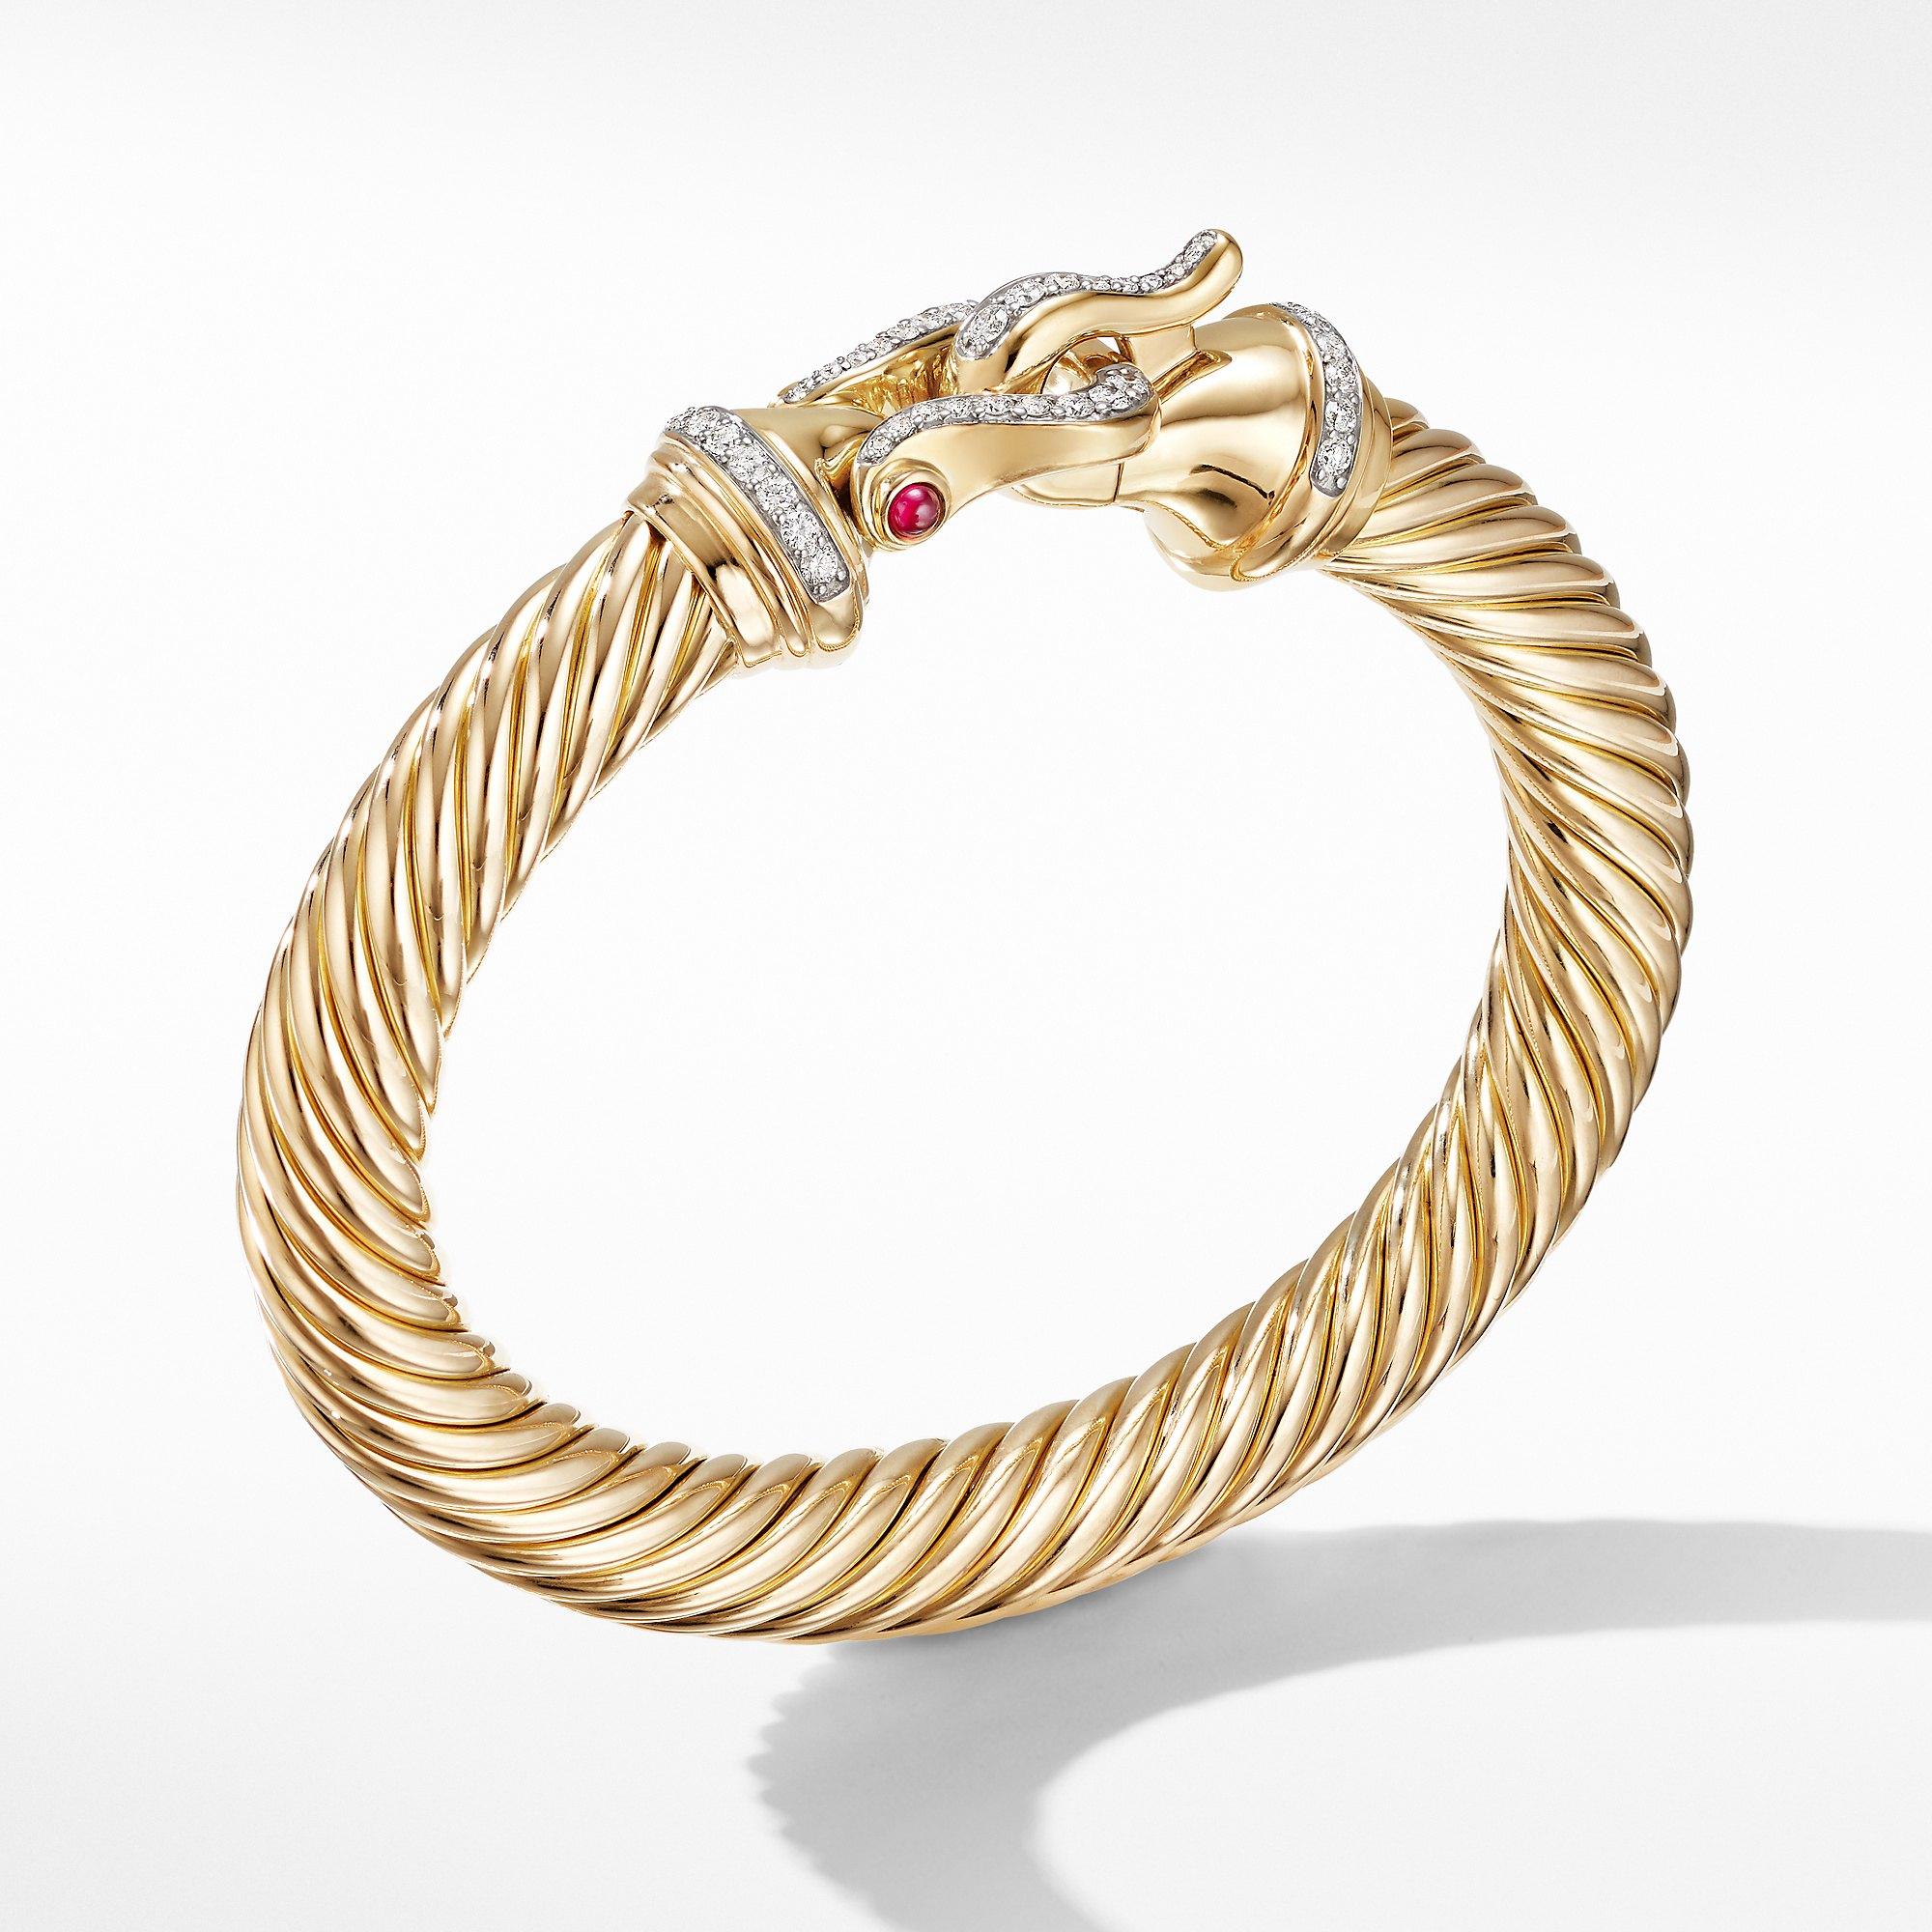 David Yurman Cable Buckle Bracelet in 18K Yellow Gold with Diamonds and Rubies